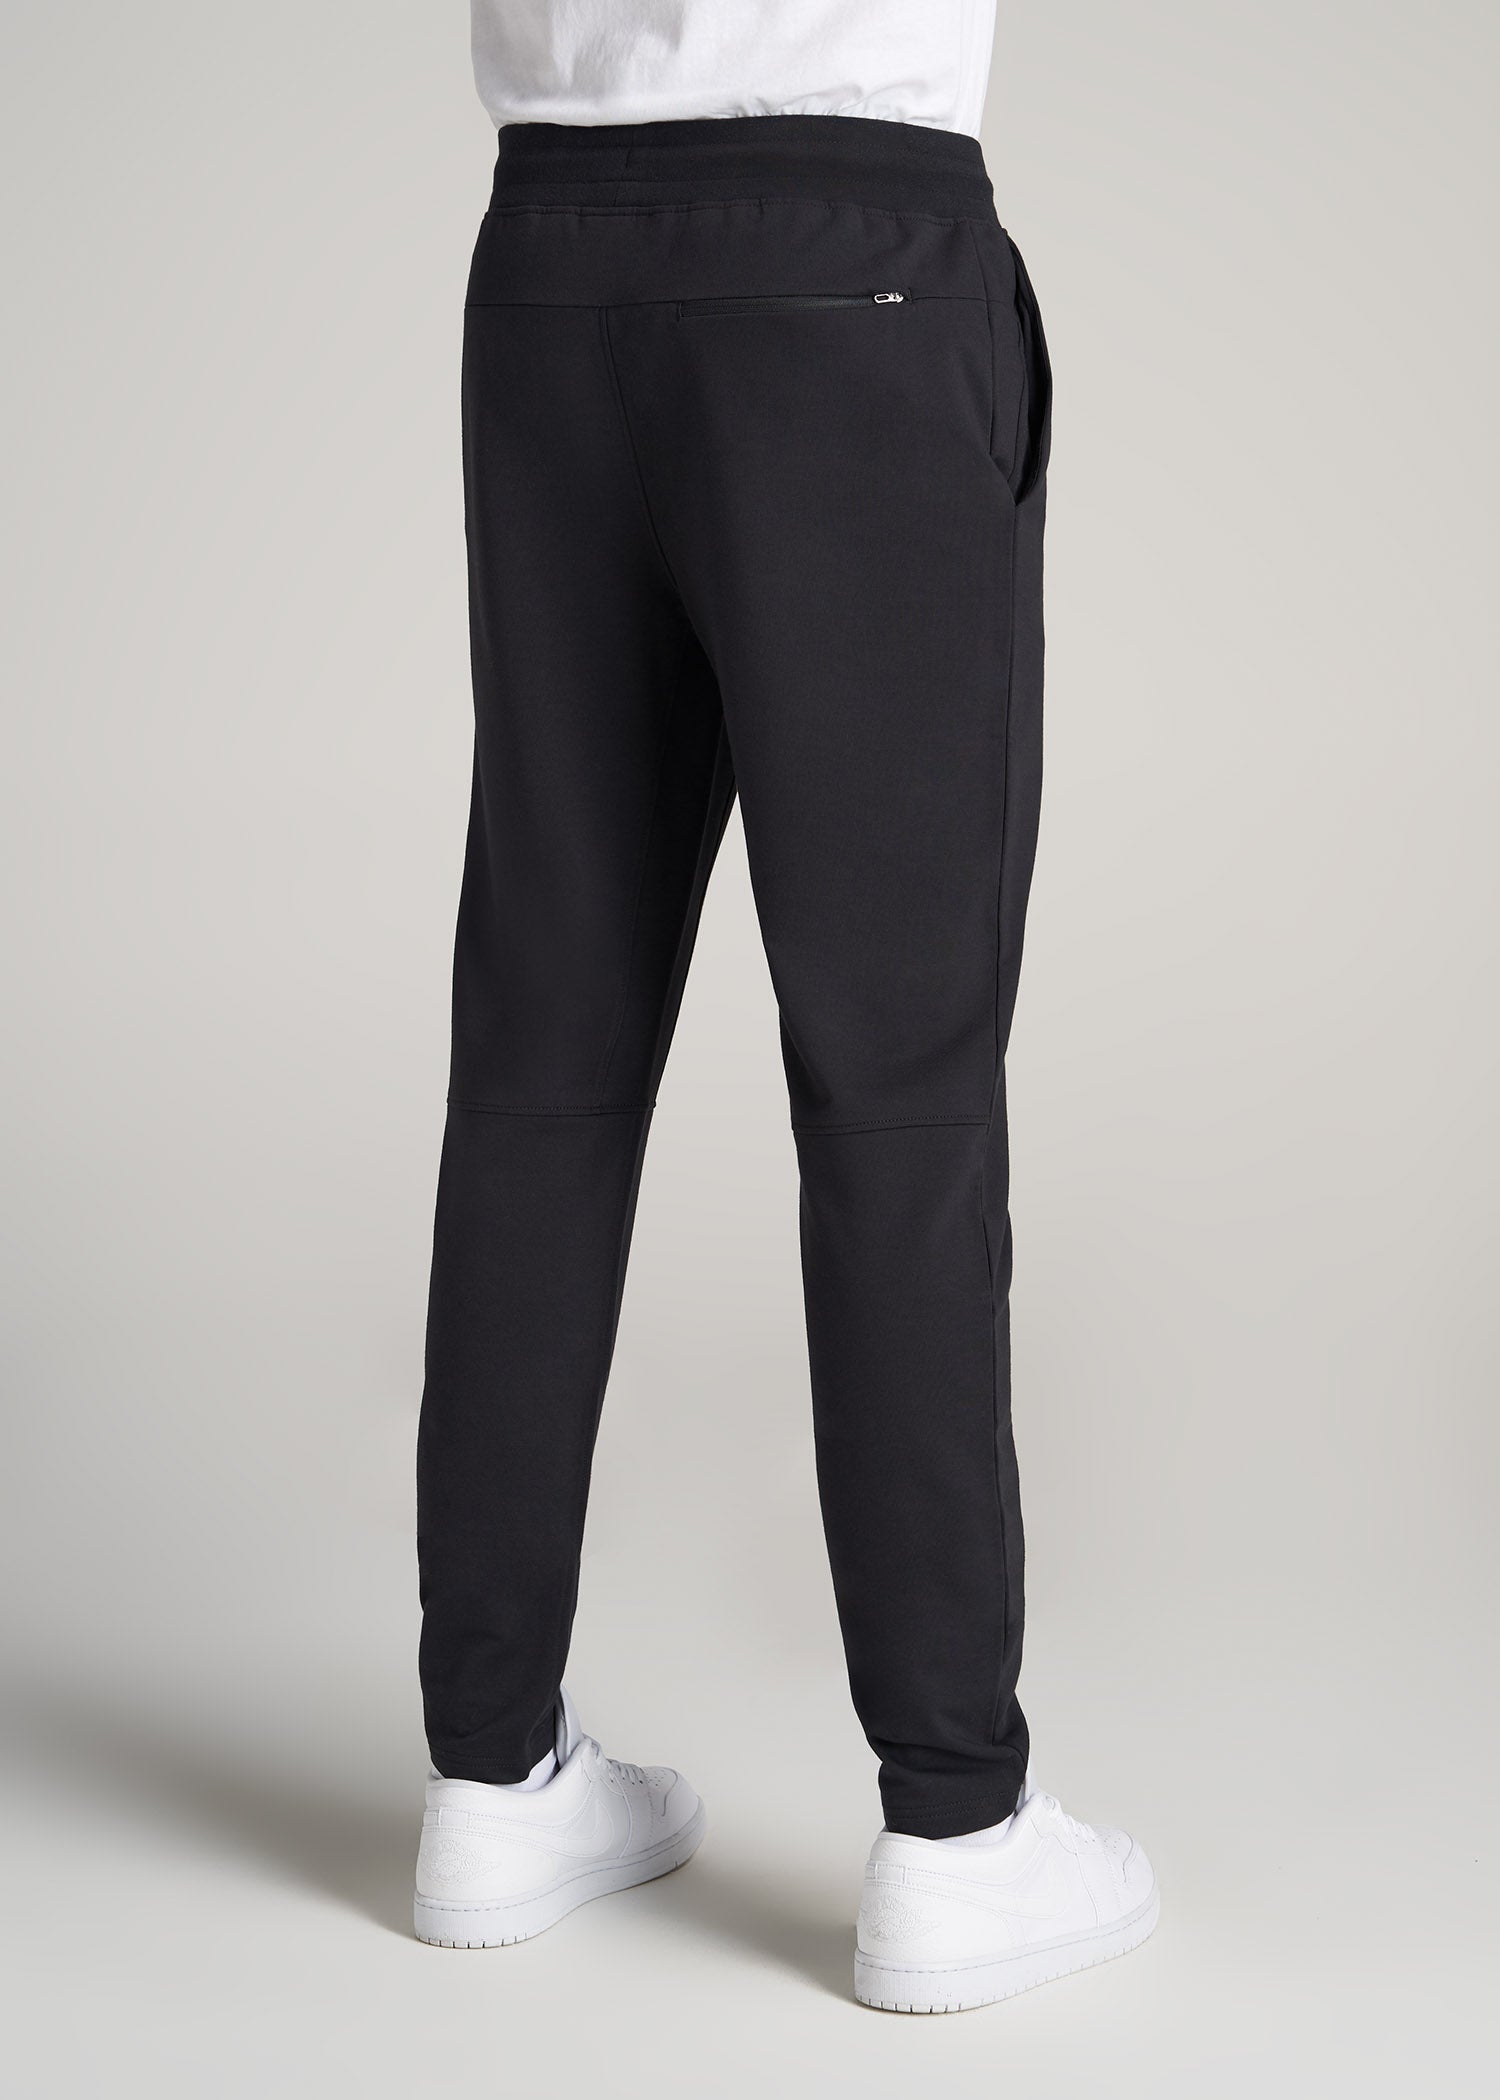 American-Tall-Men-Performance-Tapered-French-Terry-Sweatpants-Black-back